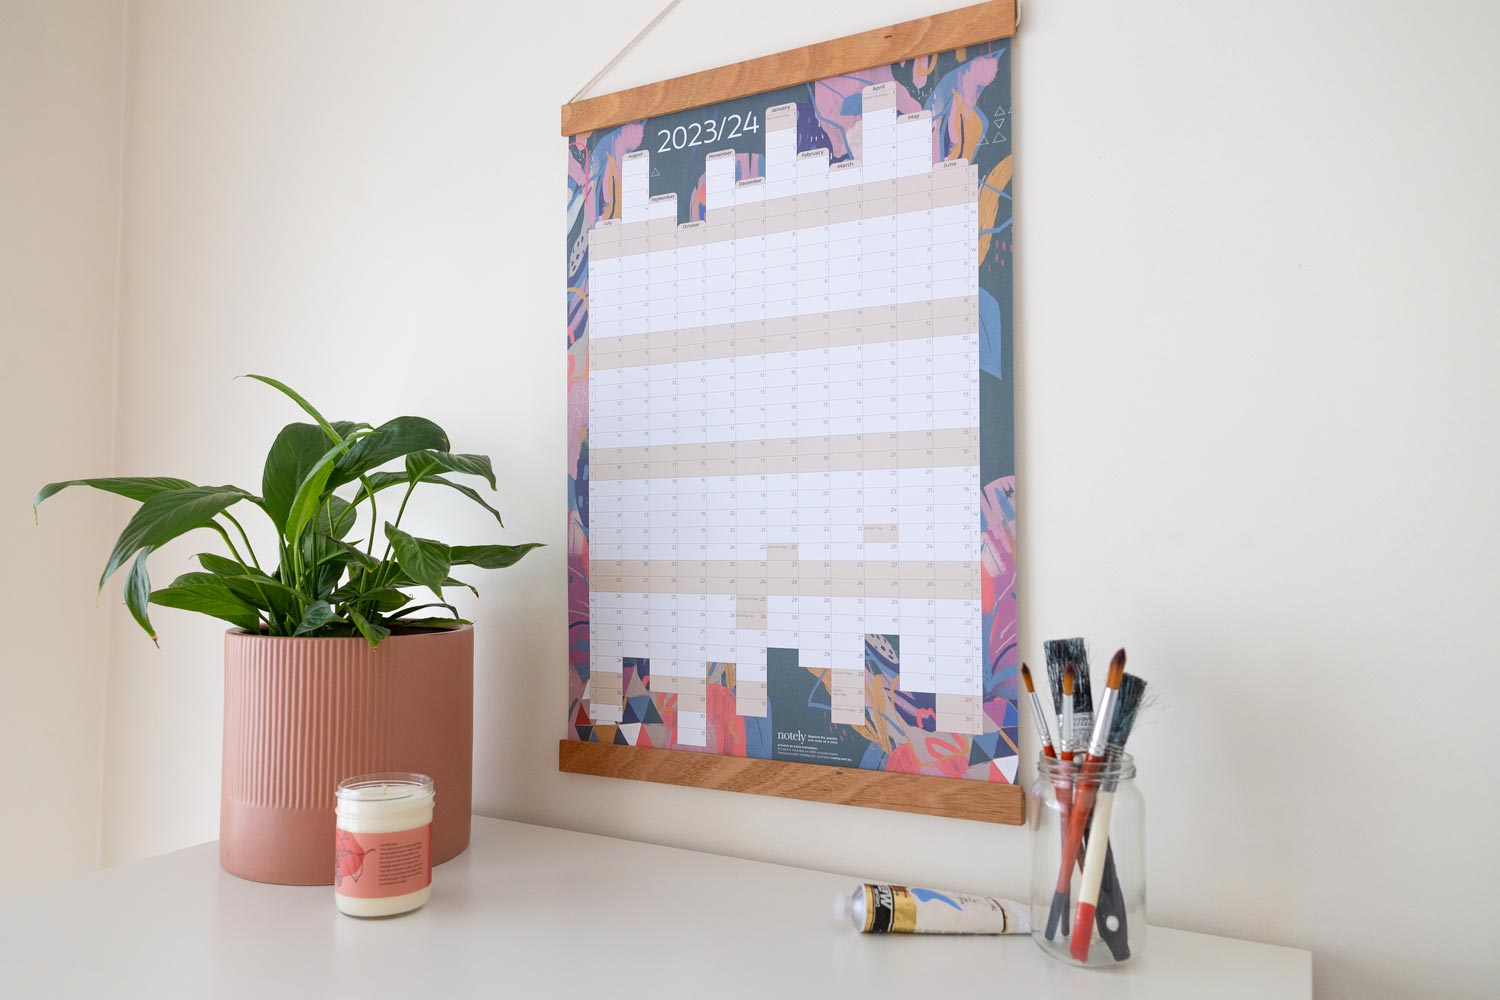 Notely Financial Year Wall Planner hanging on wall with pot plant, candle and paintbrushes in a jar